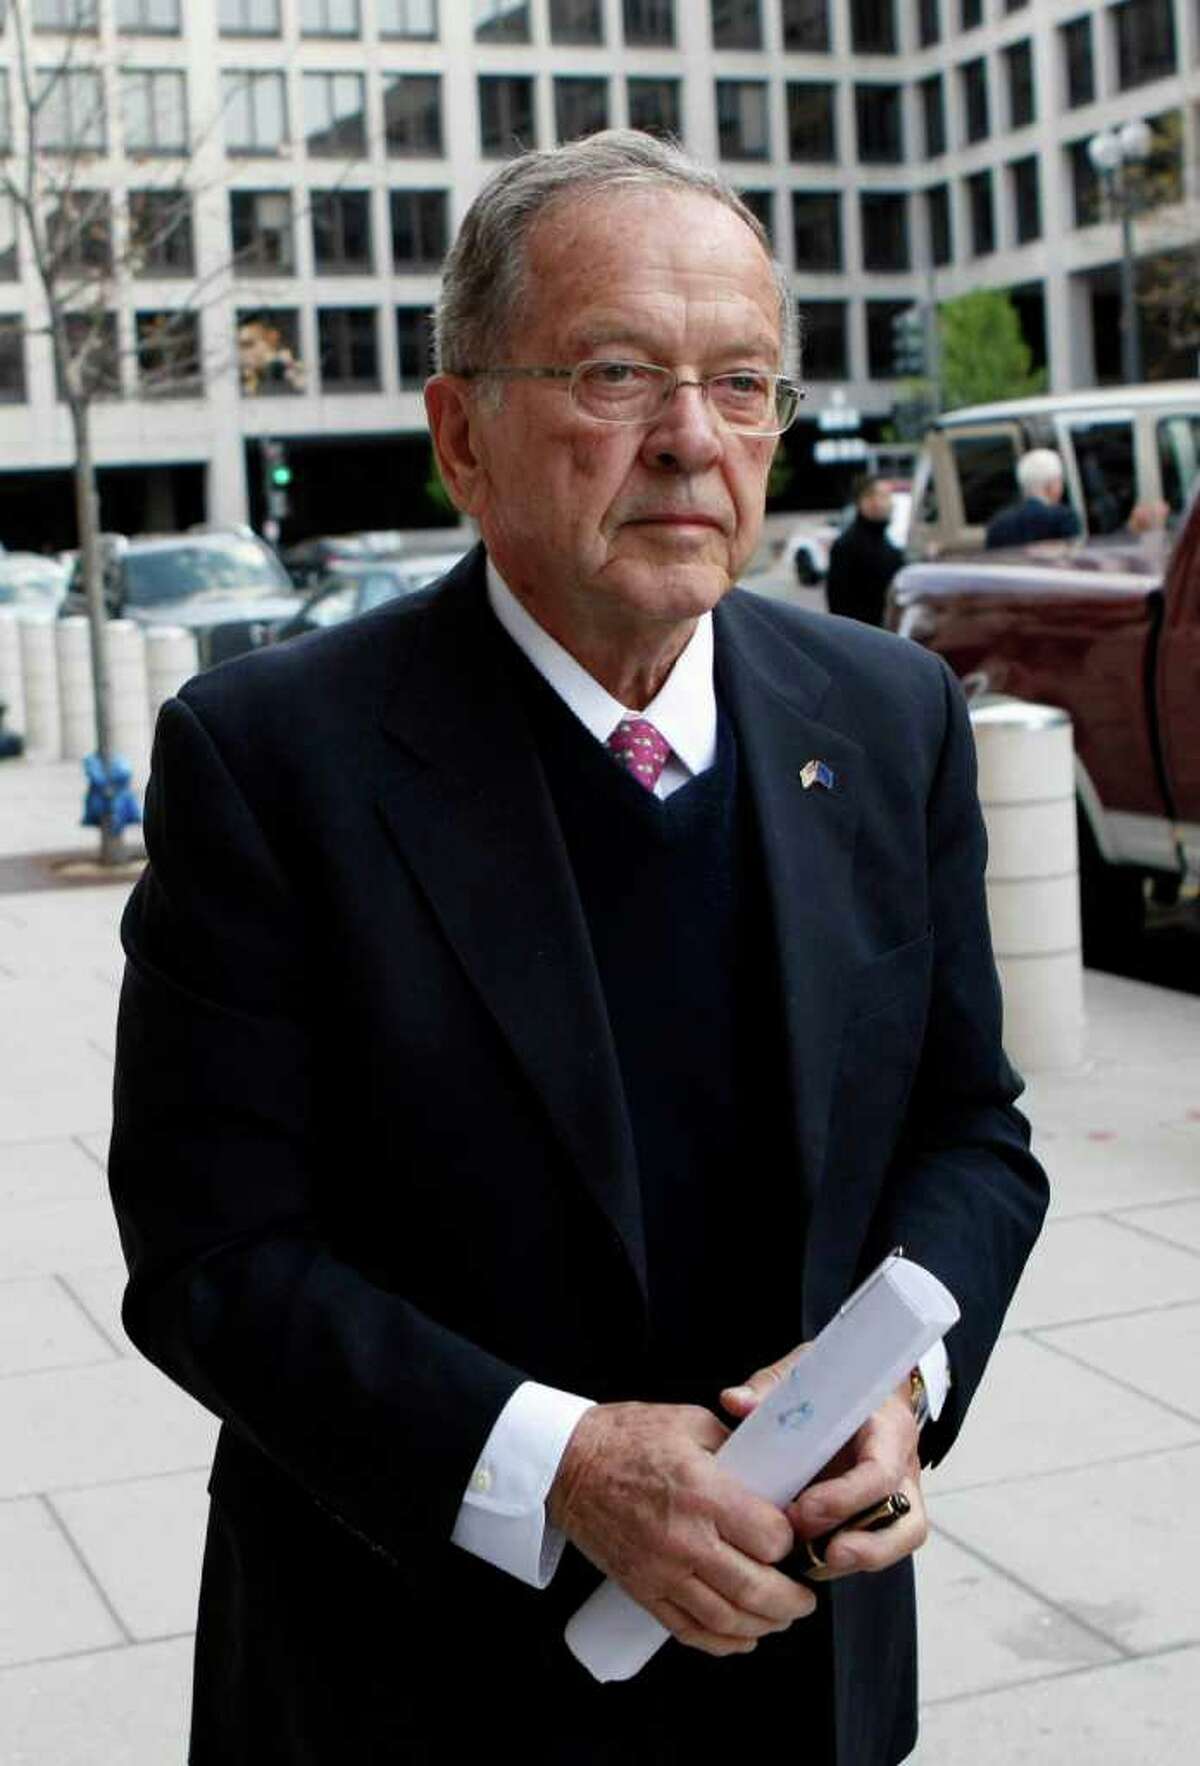 FILE - In this April 7, 2009 file photo, former Alaska Sen. Ted Stevens, R-Alaska, arrives at federal court in Washington. A report on misconduct in the Justice Department released Thursday paints a picture of a rudderless and sometimes dysfunctional public corruption unit under the man who has since become the face of President Barack Obama's effort to crack down on officials who leak government secrets.